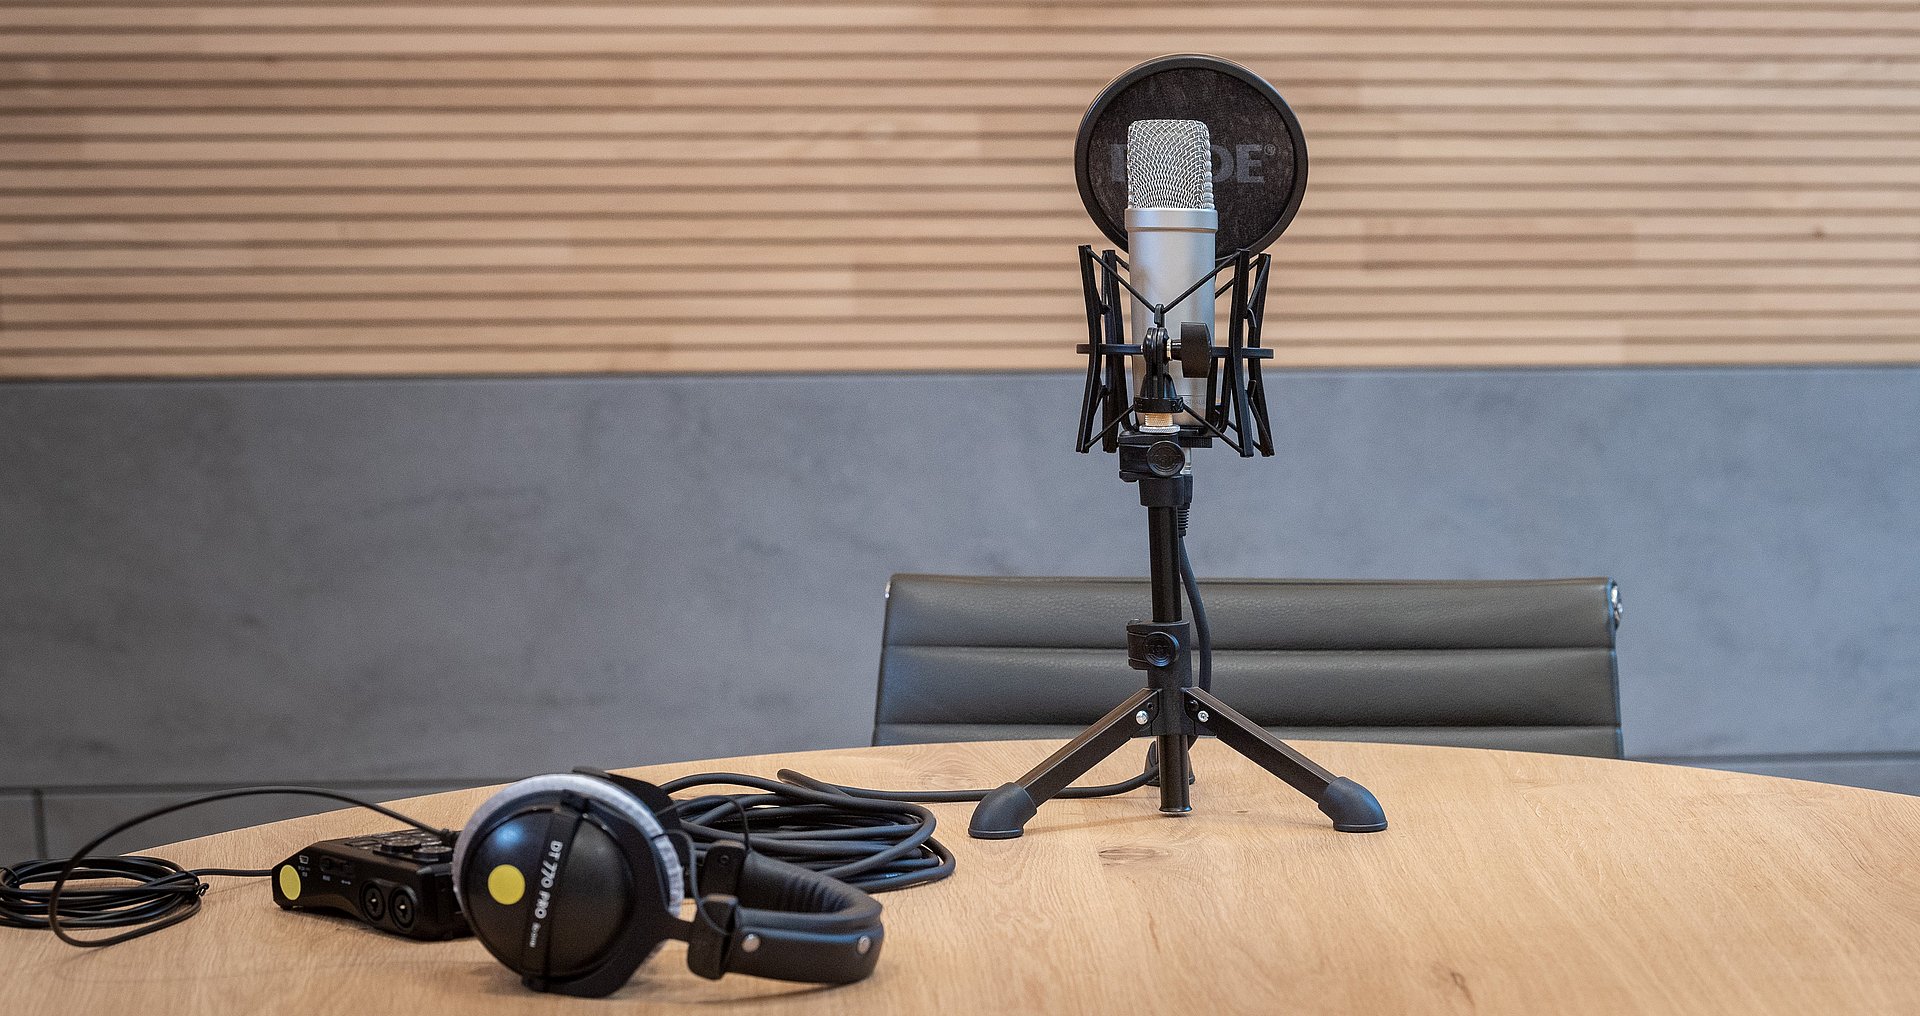 Recording equipment on a table, including a large microphone